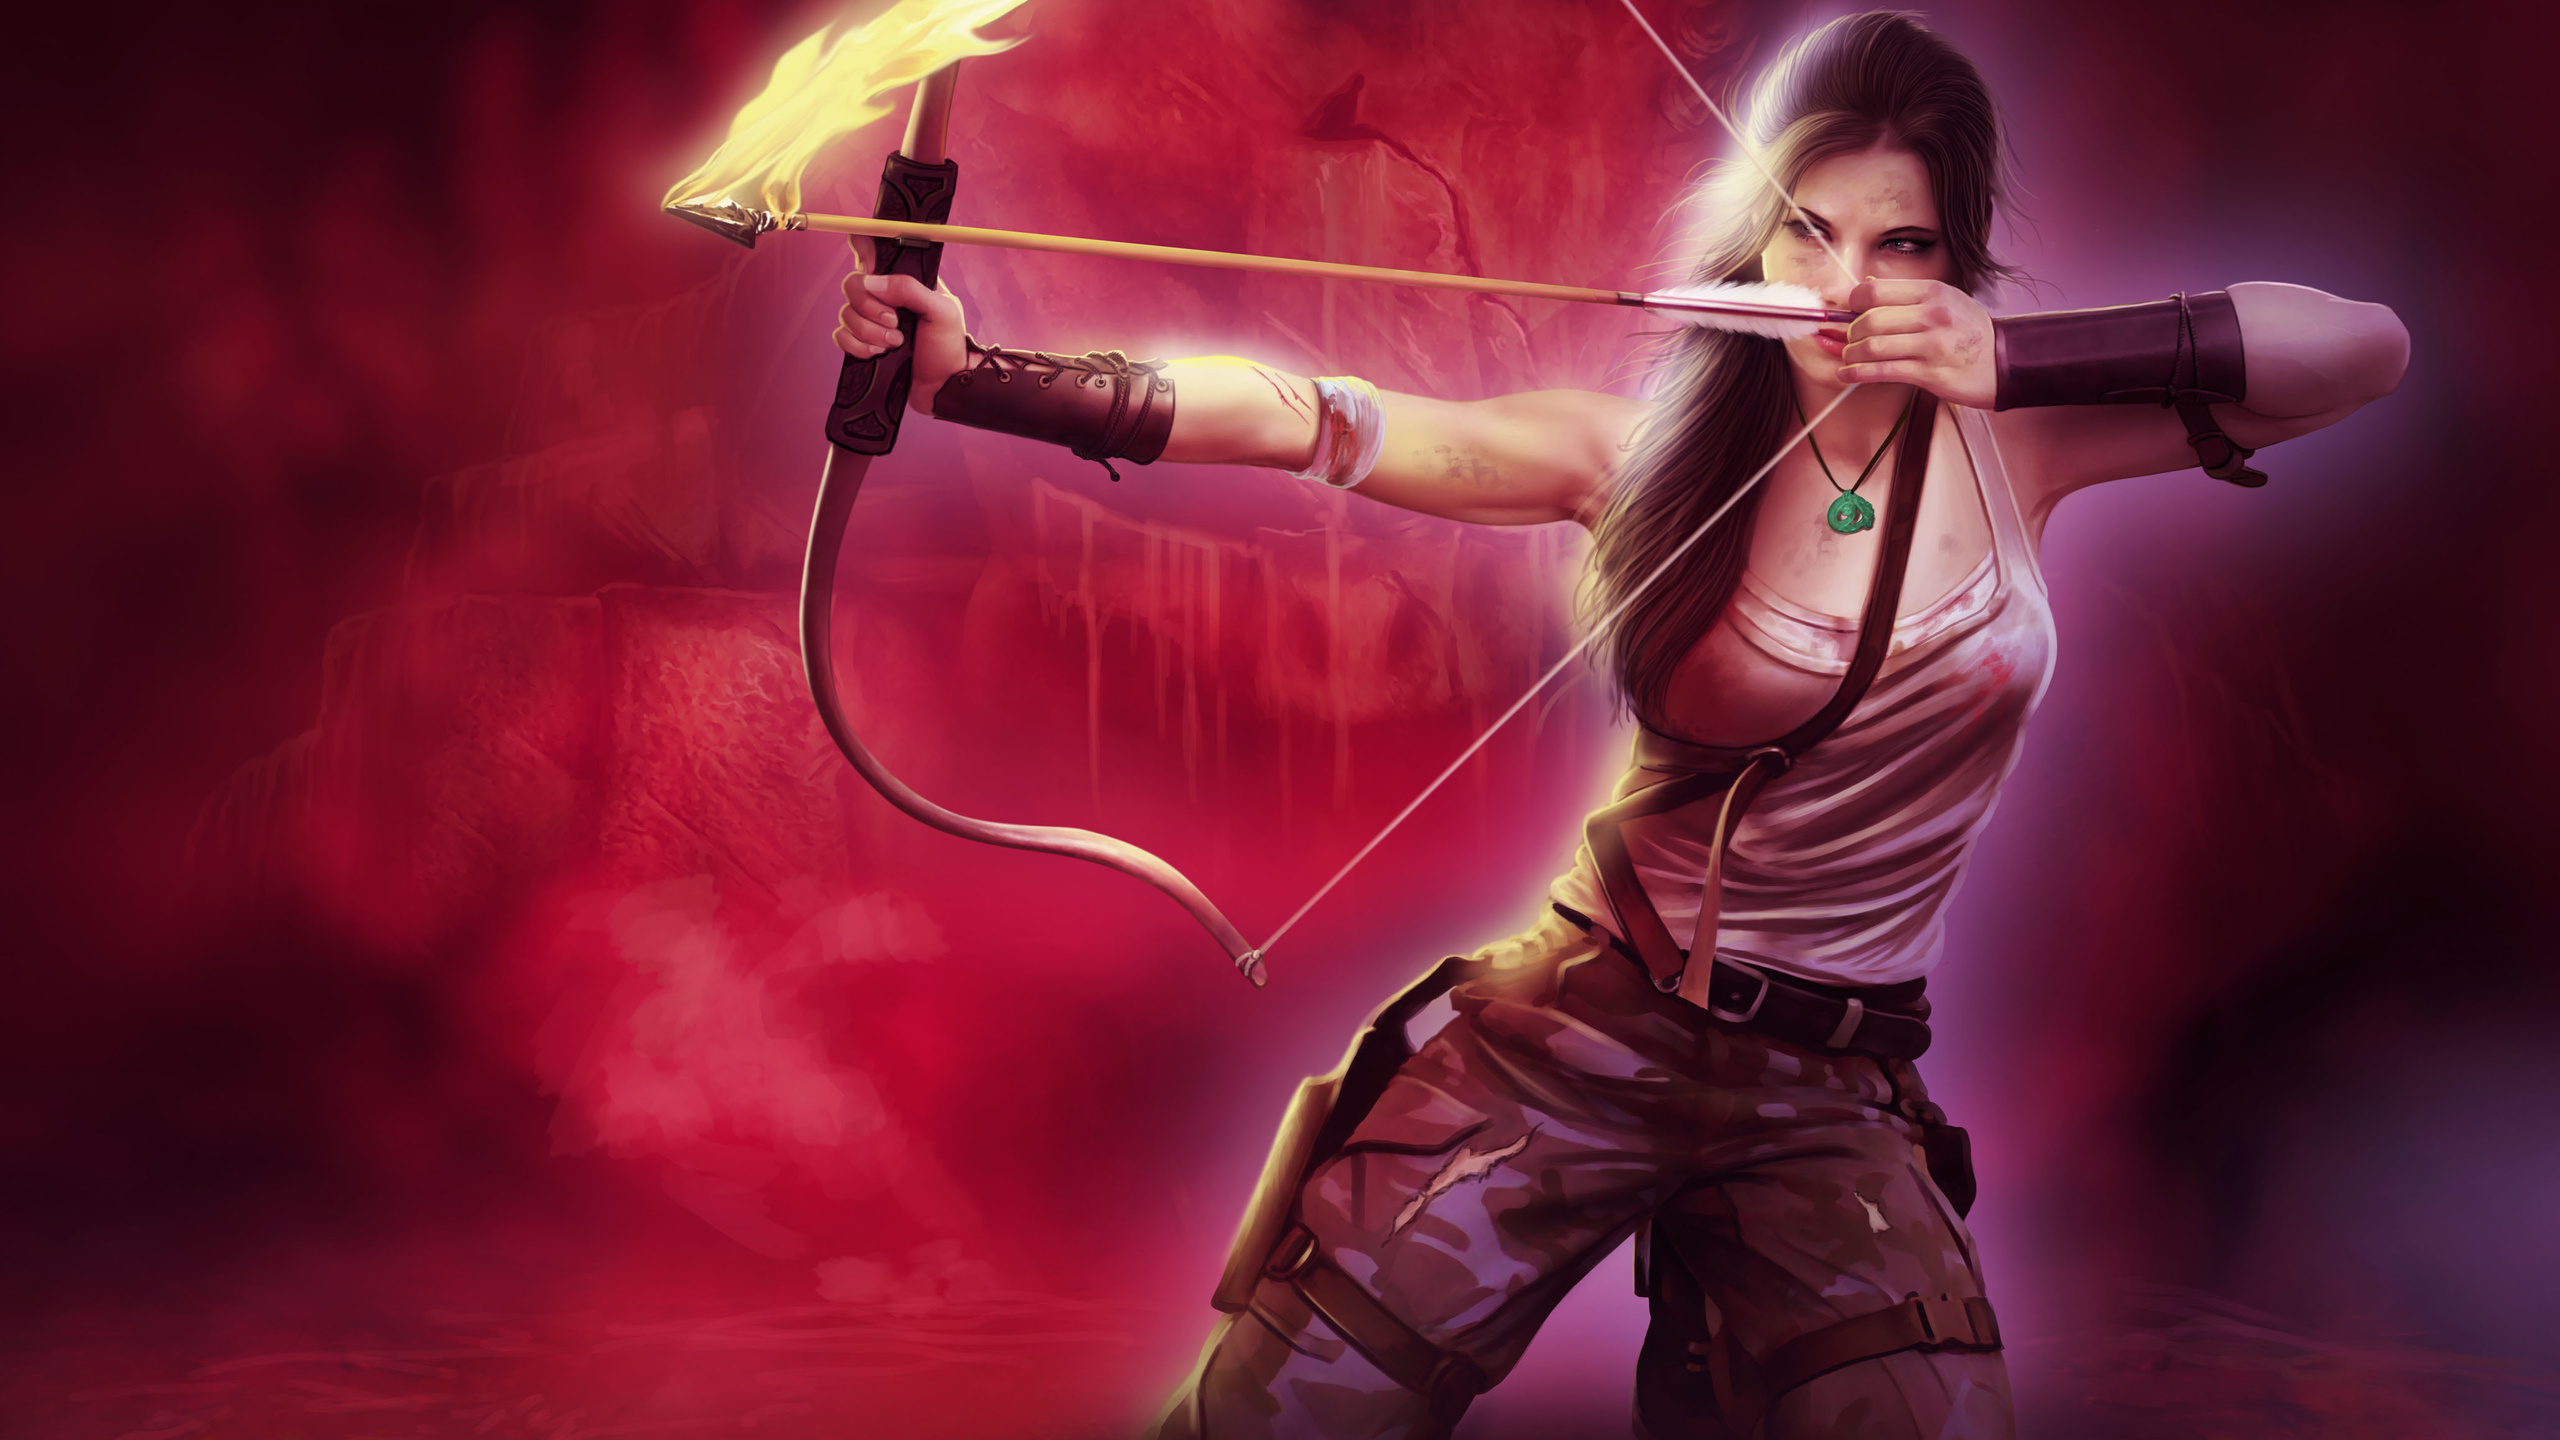 Wallpapers bowstring girl warrior on the desktop